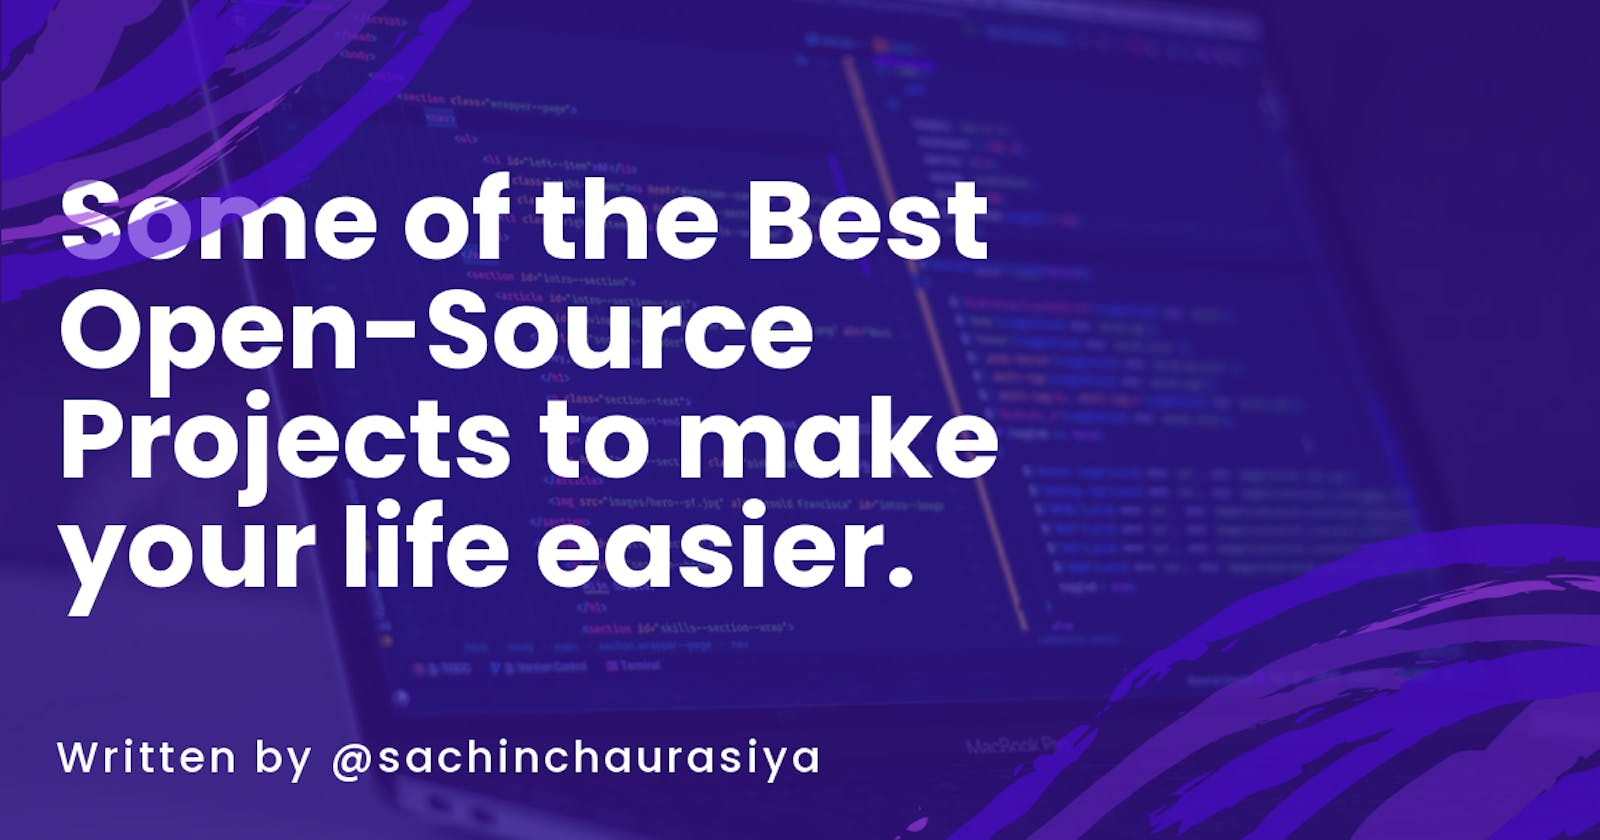 Some of the Best Open-Source Projects to make your life easier.